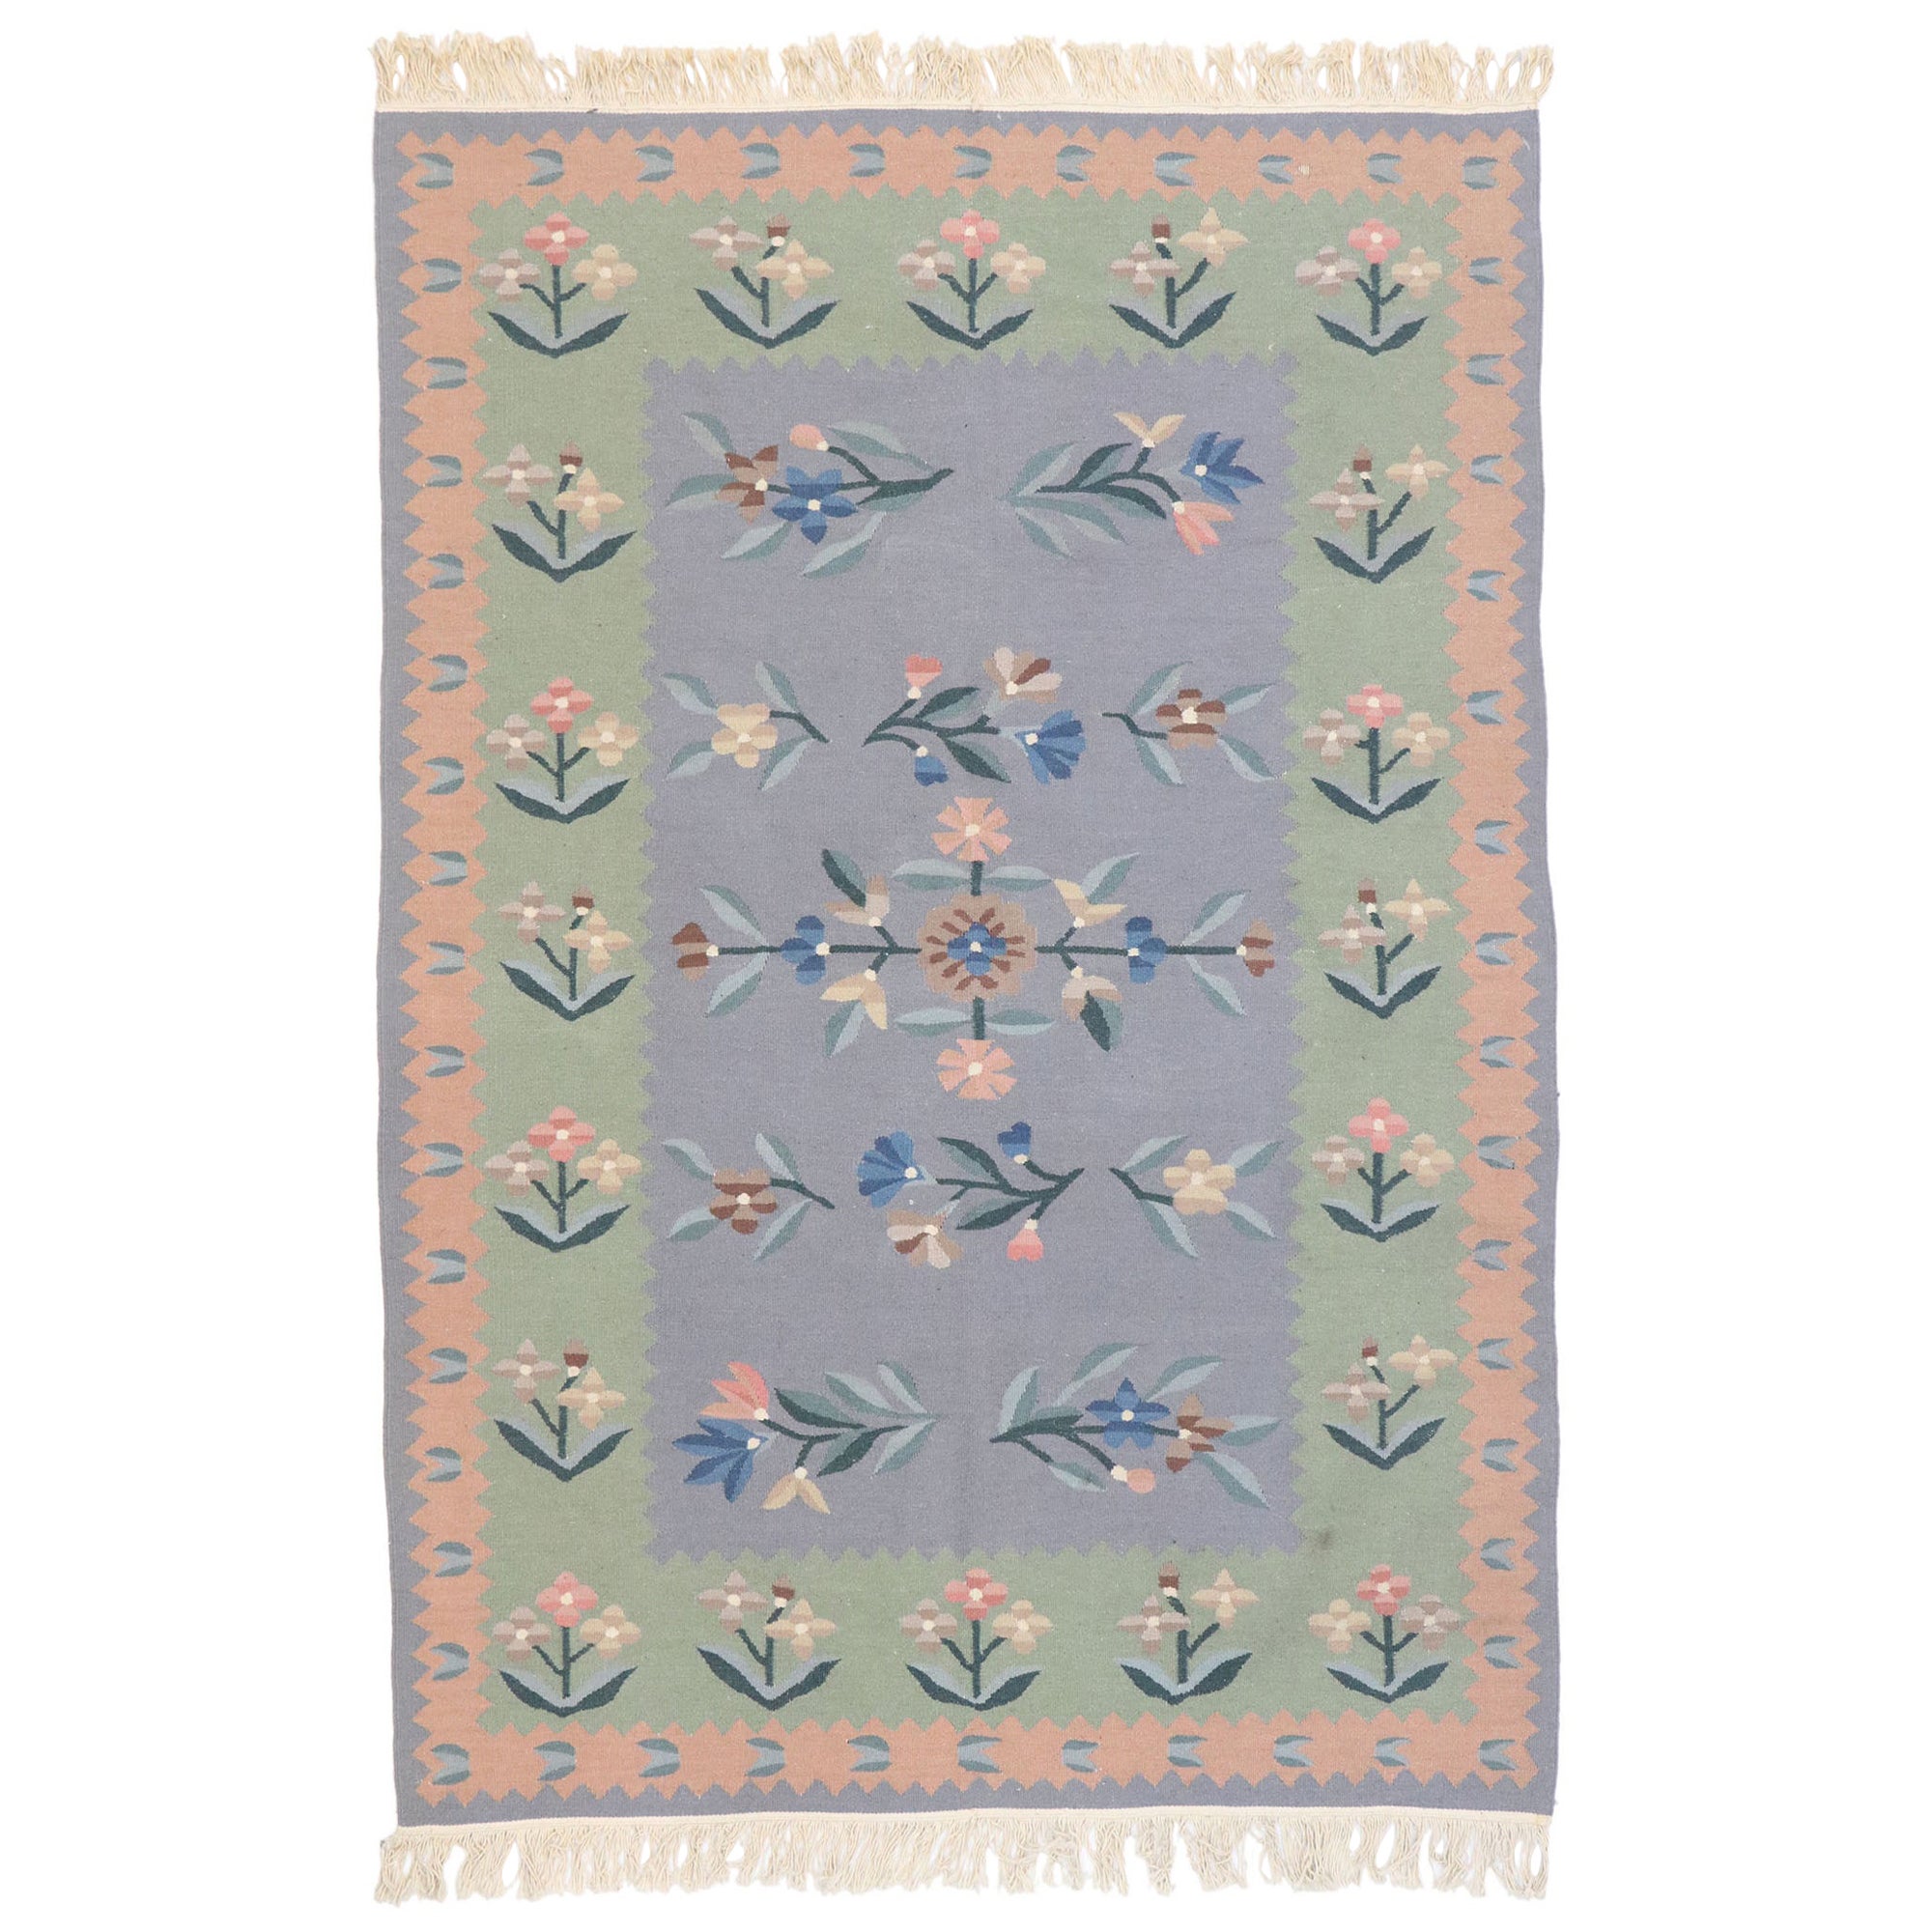 Vintage Floral Kilim Rug with French Victorian Style